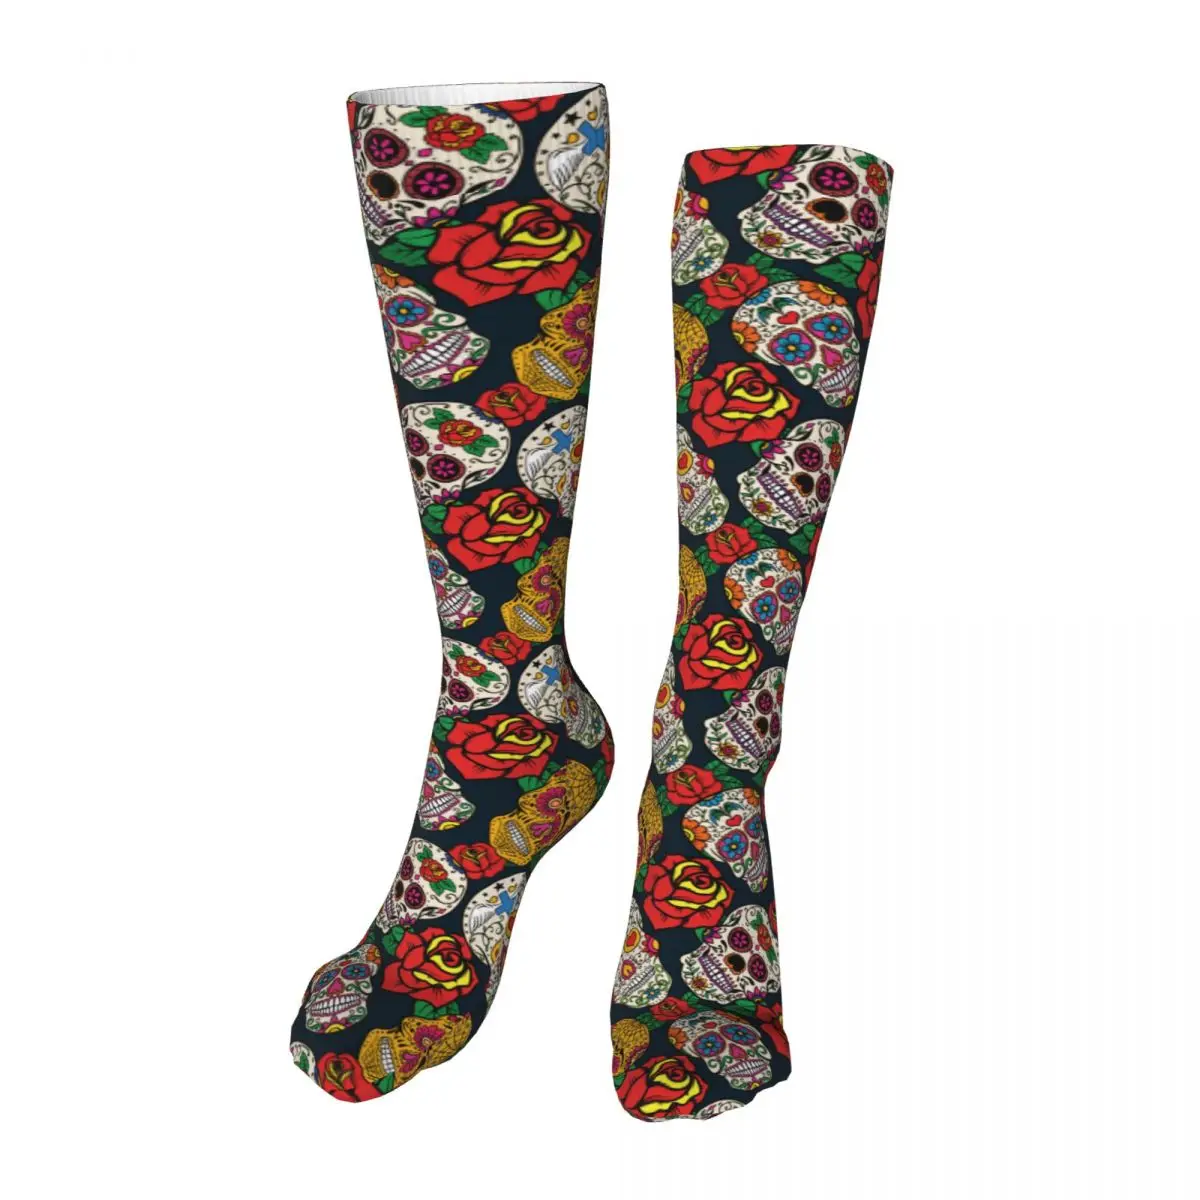 

Mexican Sugar Skull With Rose Compression Socks For Women And Men Circulation Stockings Best Support For Nurses Running Hiking